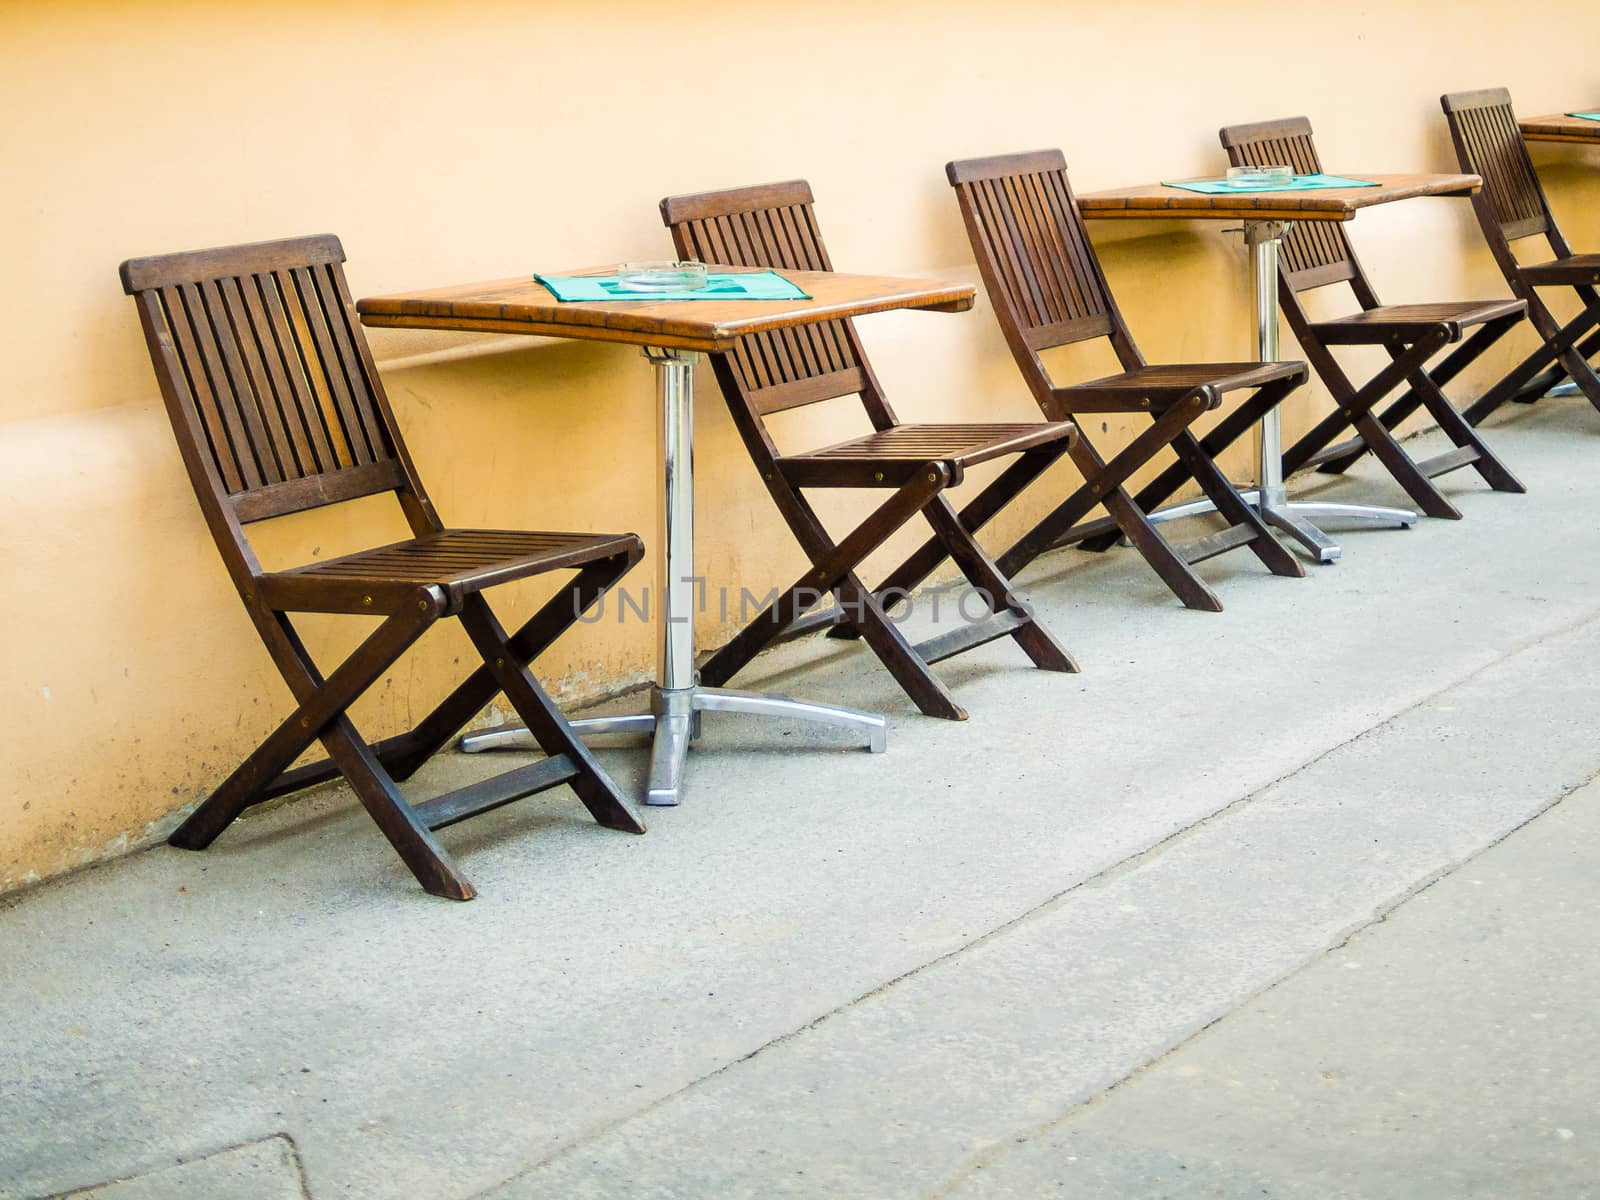 Chairs and tables on the street - coffe, pub, restaurant, summer time setting